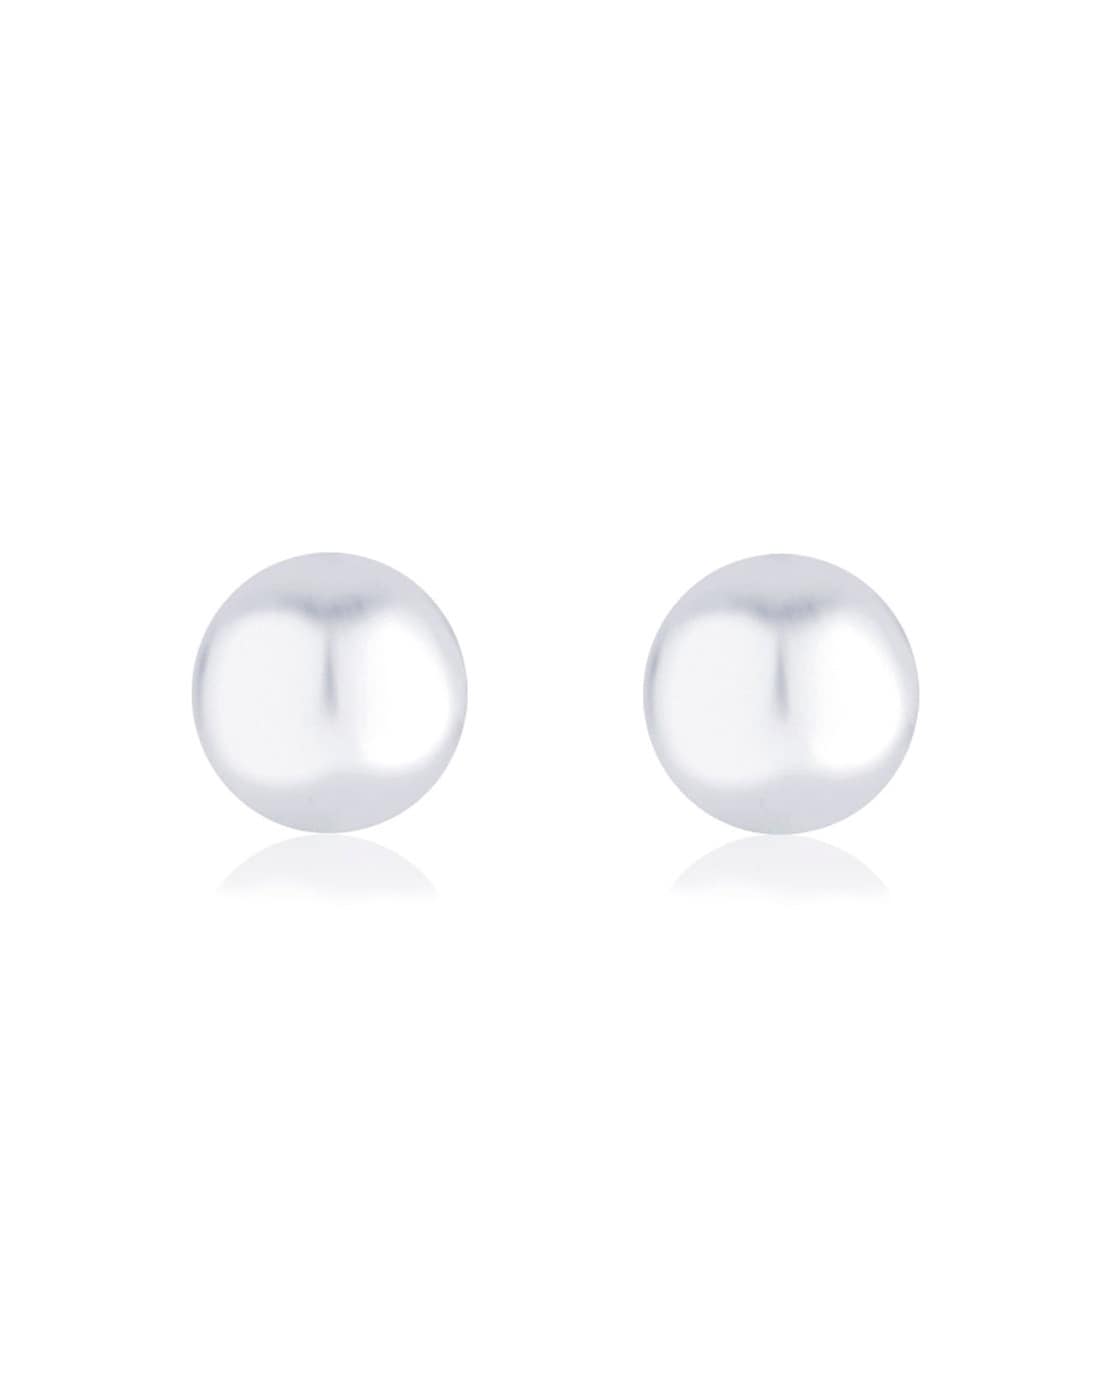 925 STERLING SILVER PAIR OF ROUND SHAPE 4MM HOLLOW BALL STUD EARRINGS FOR  MEN WOMENGIRLS  BOYS